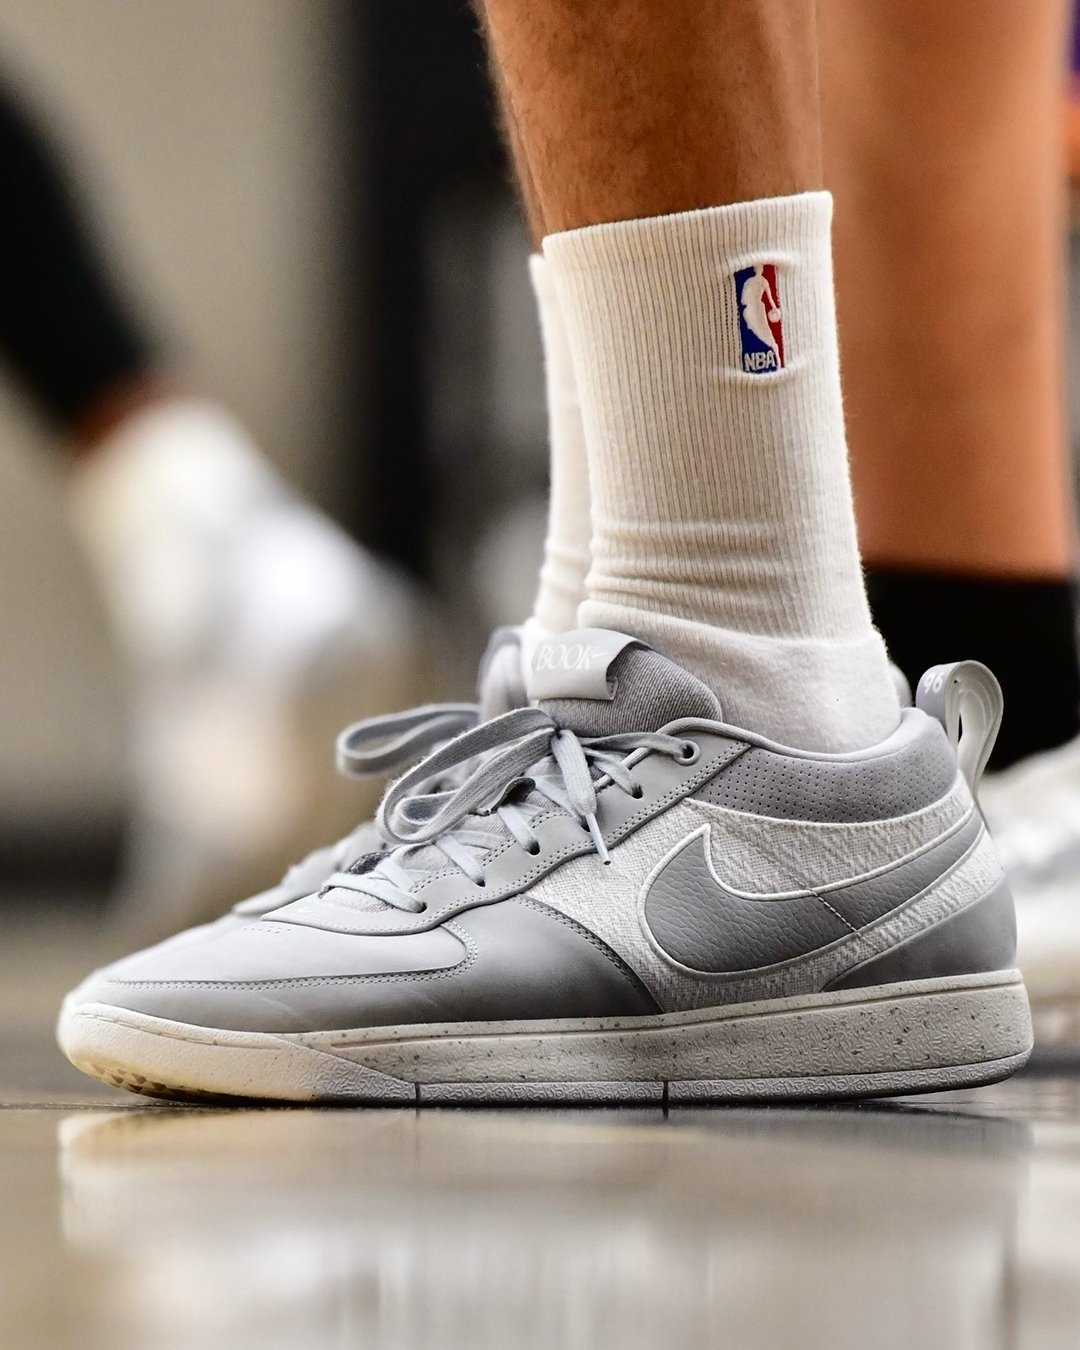 Devin Booker in the nike navy Book 1 "Cool Grey"